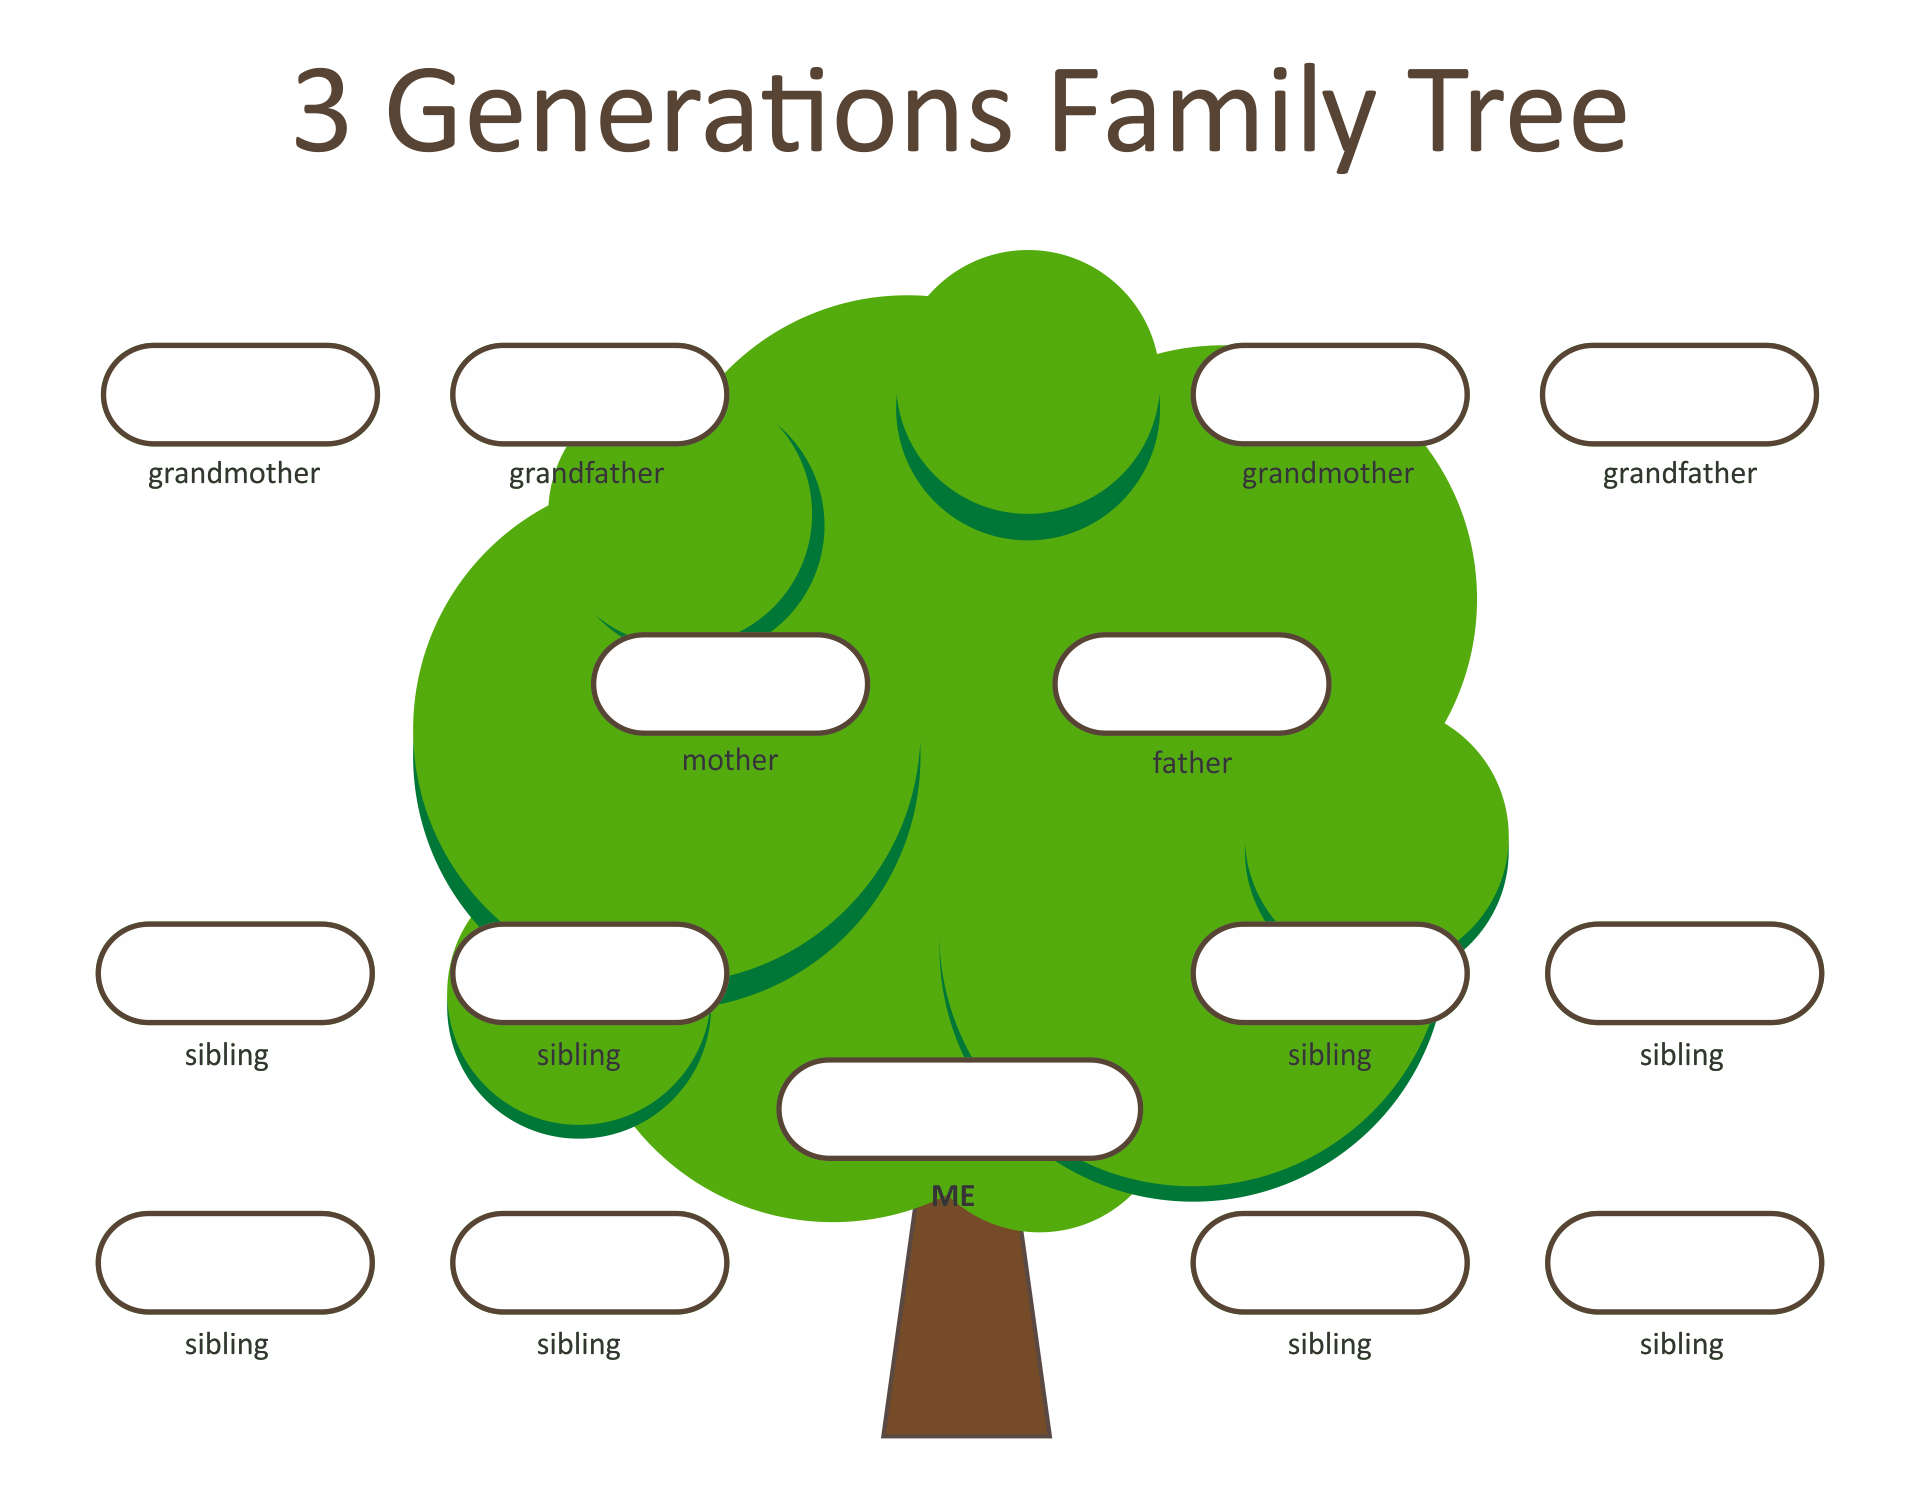 6-best-images-of-generation-family-tree-template-printable-6-generation-family-tree-chart